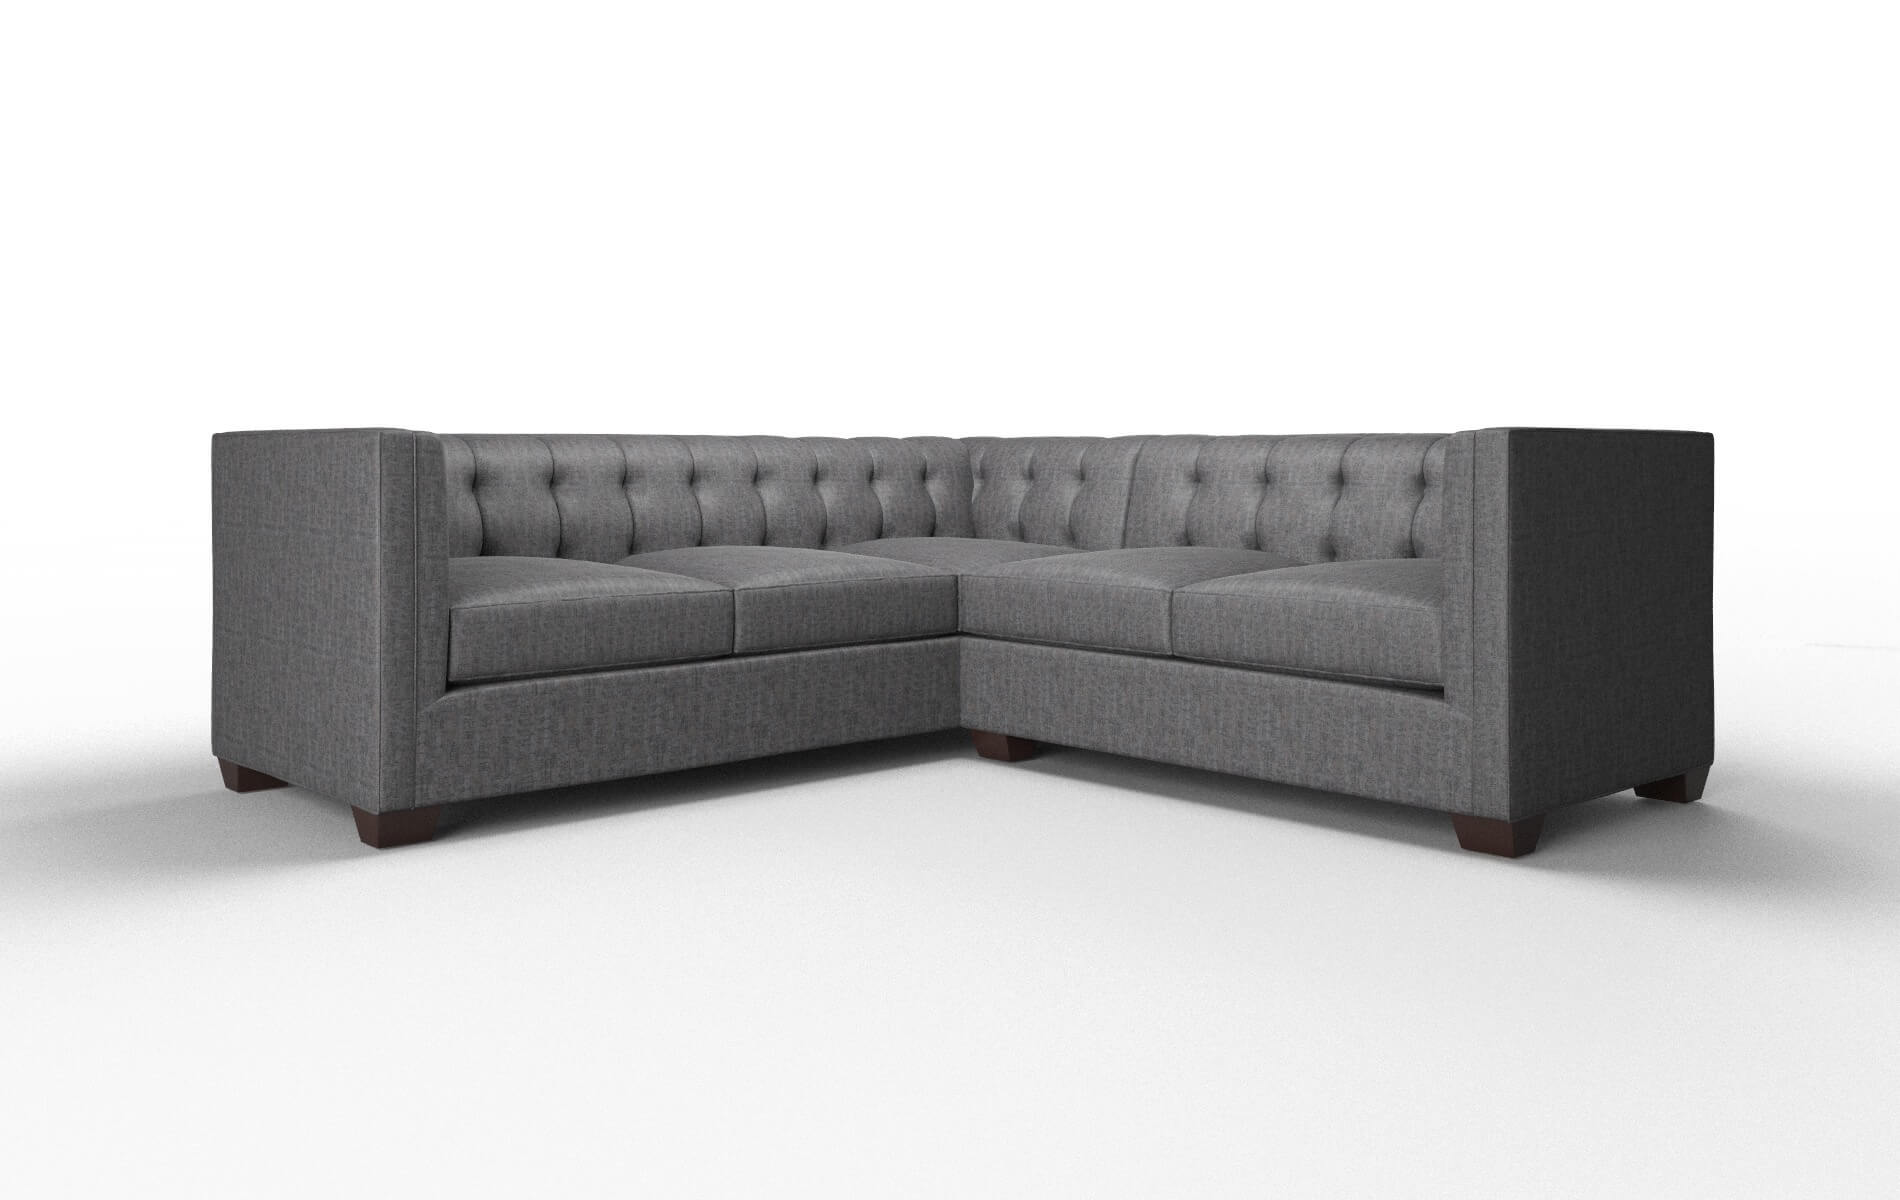 Grant Marcy Baltic Sectional espresso legs 1